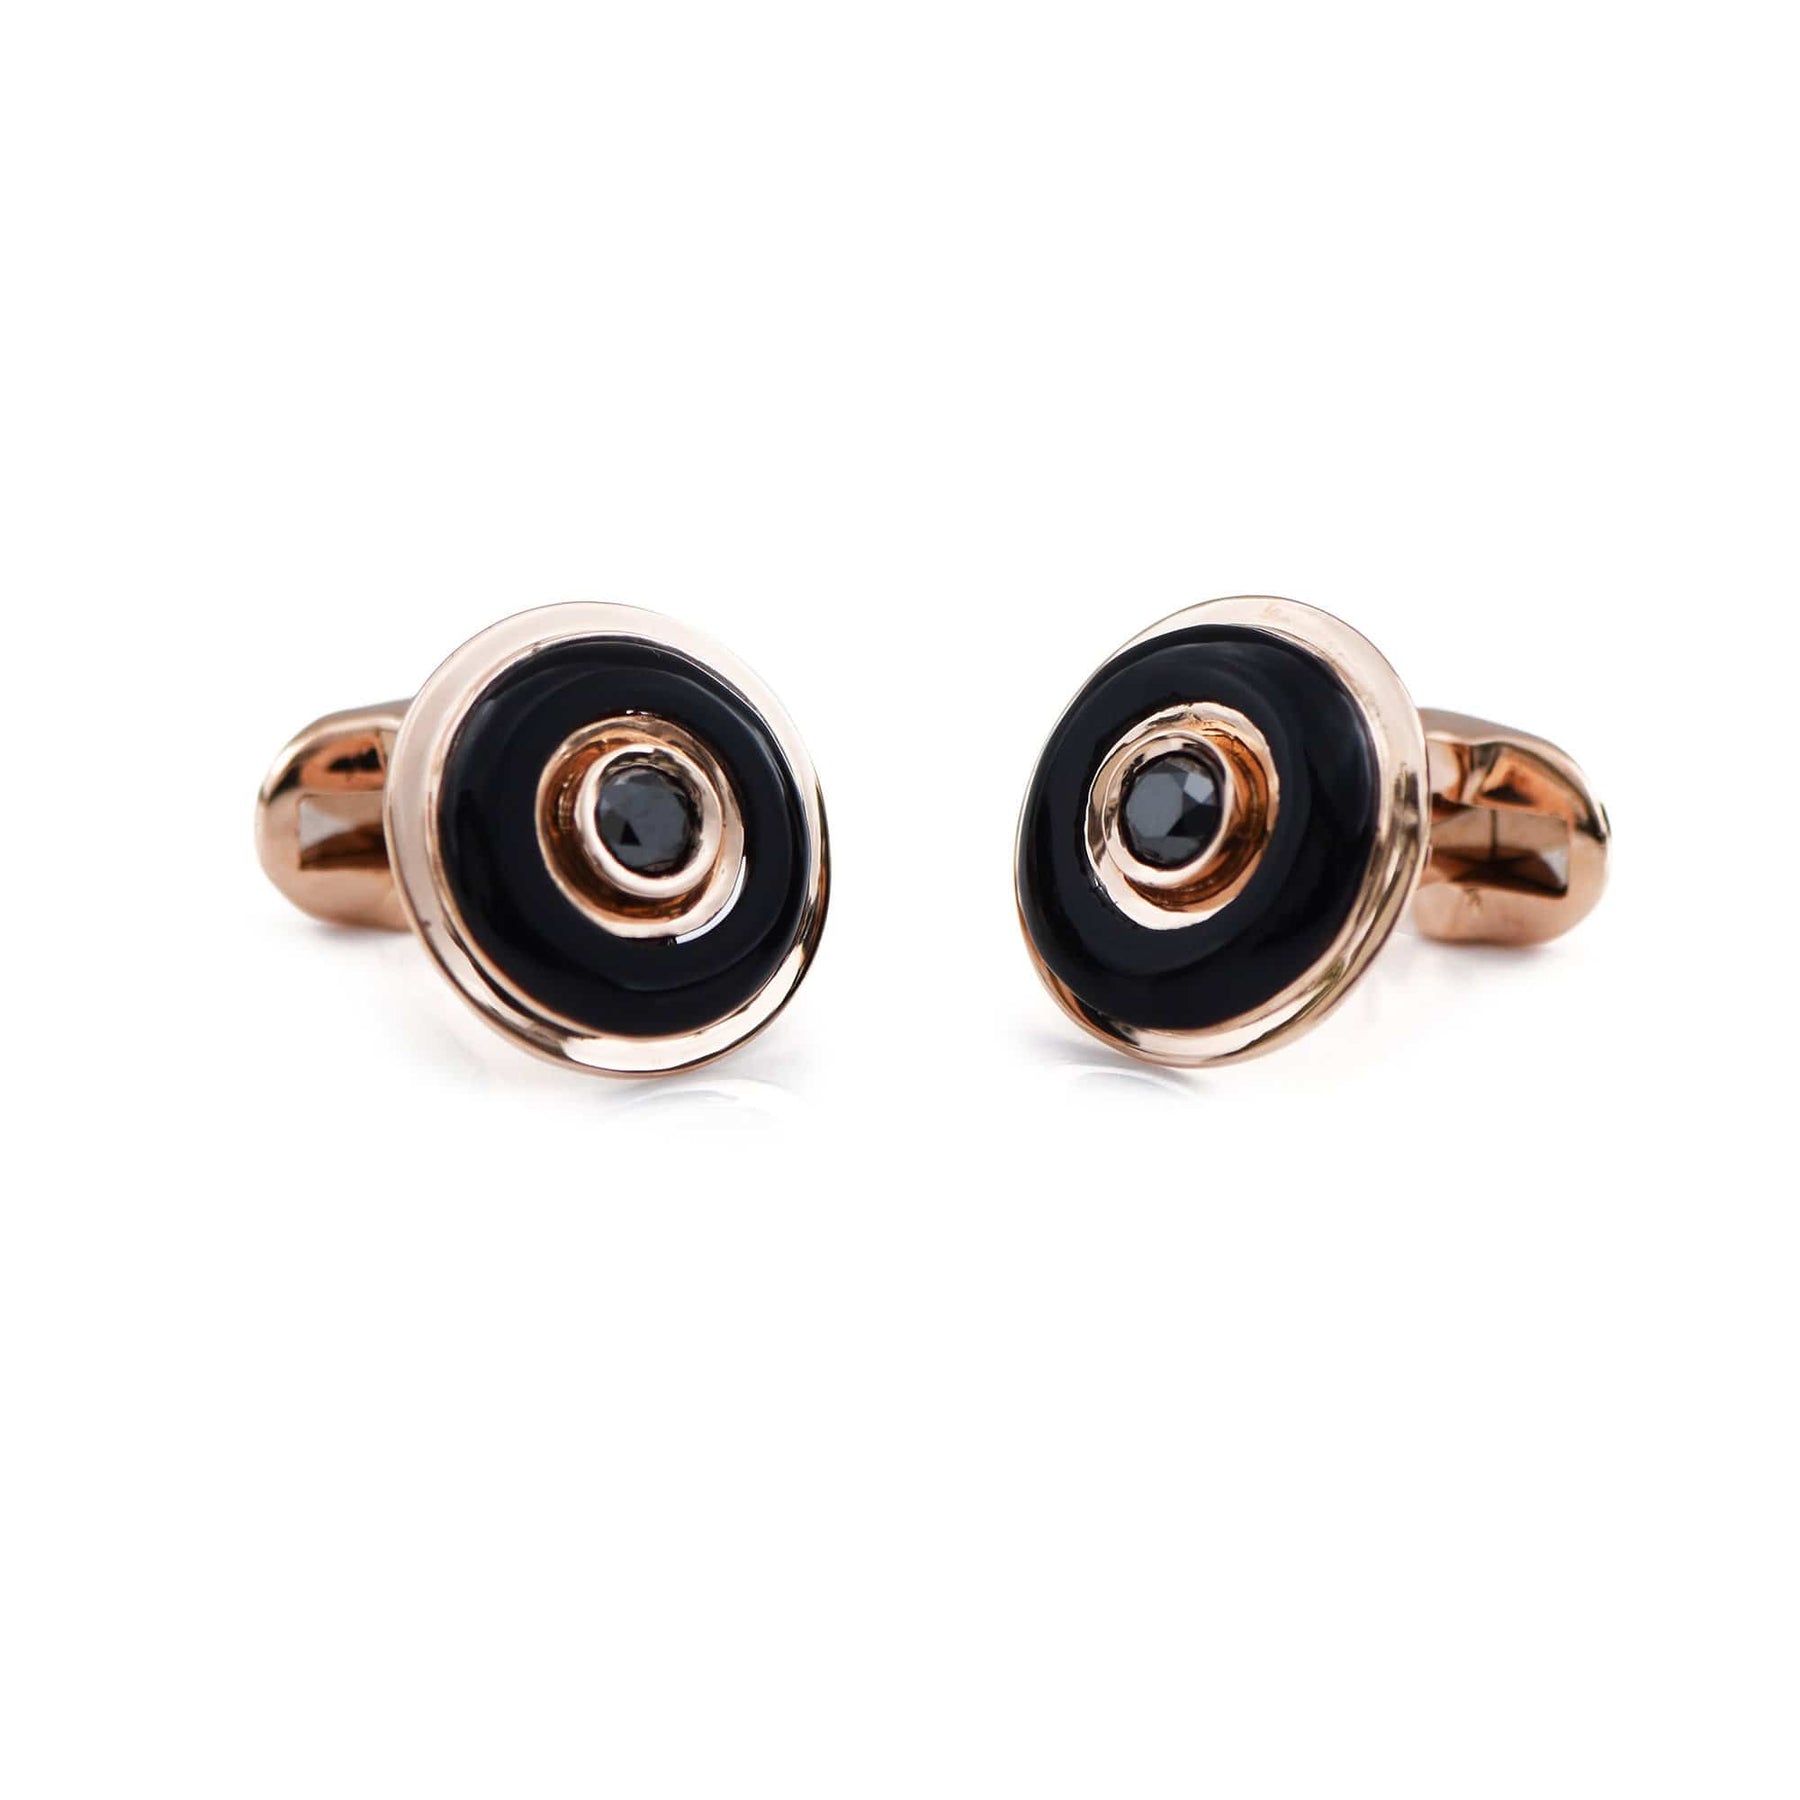 18K Gold Onyx and Black Diamond Cufflinks _ The everlasting gift - Chris Aire Fine Jewelry & Timepieces